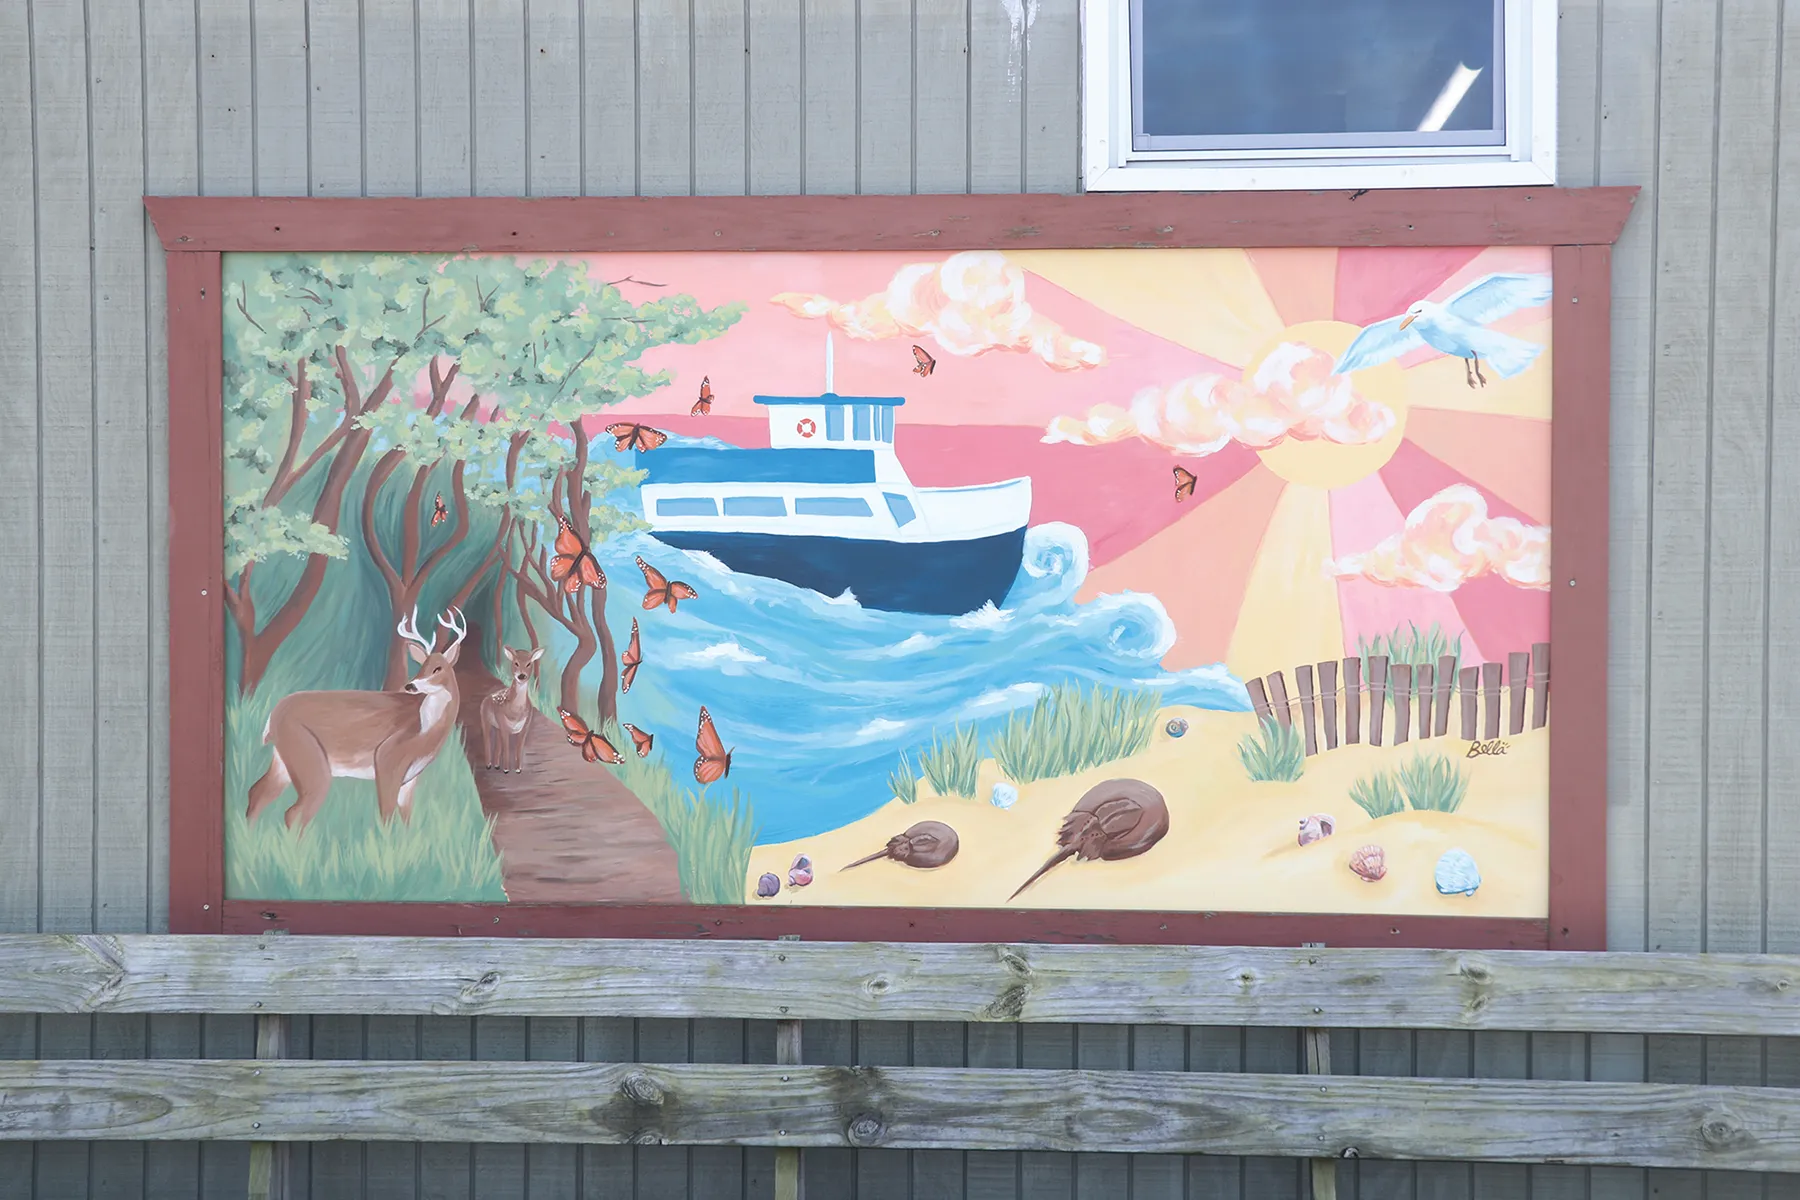 Mural depeciting ferry, beach shore and wooded path